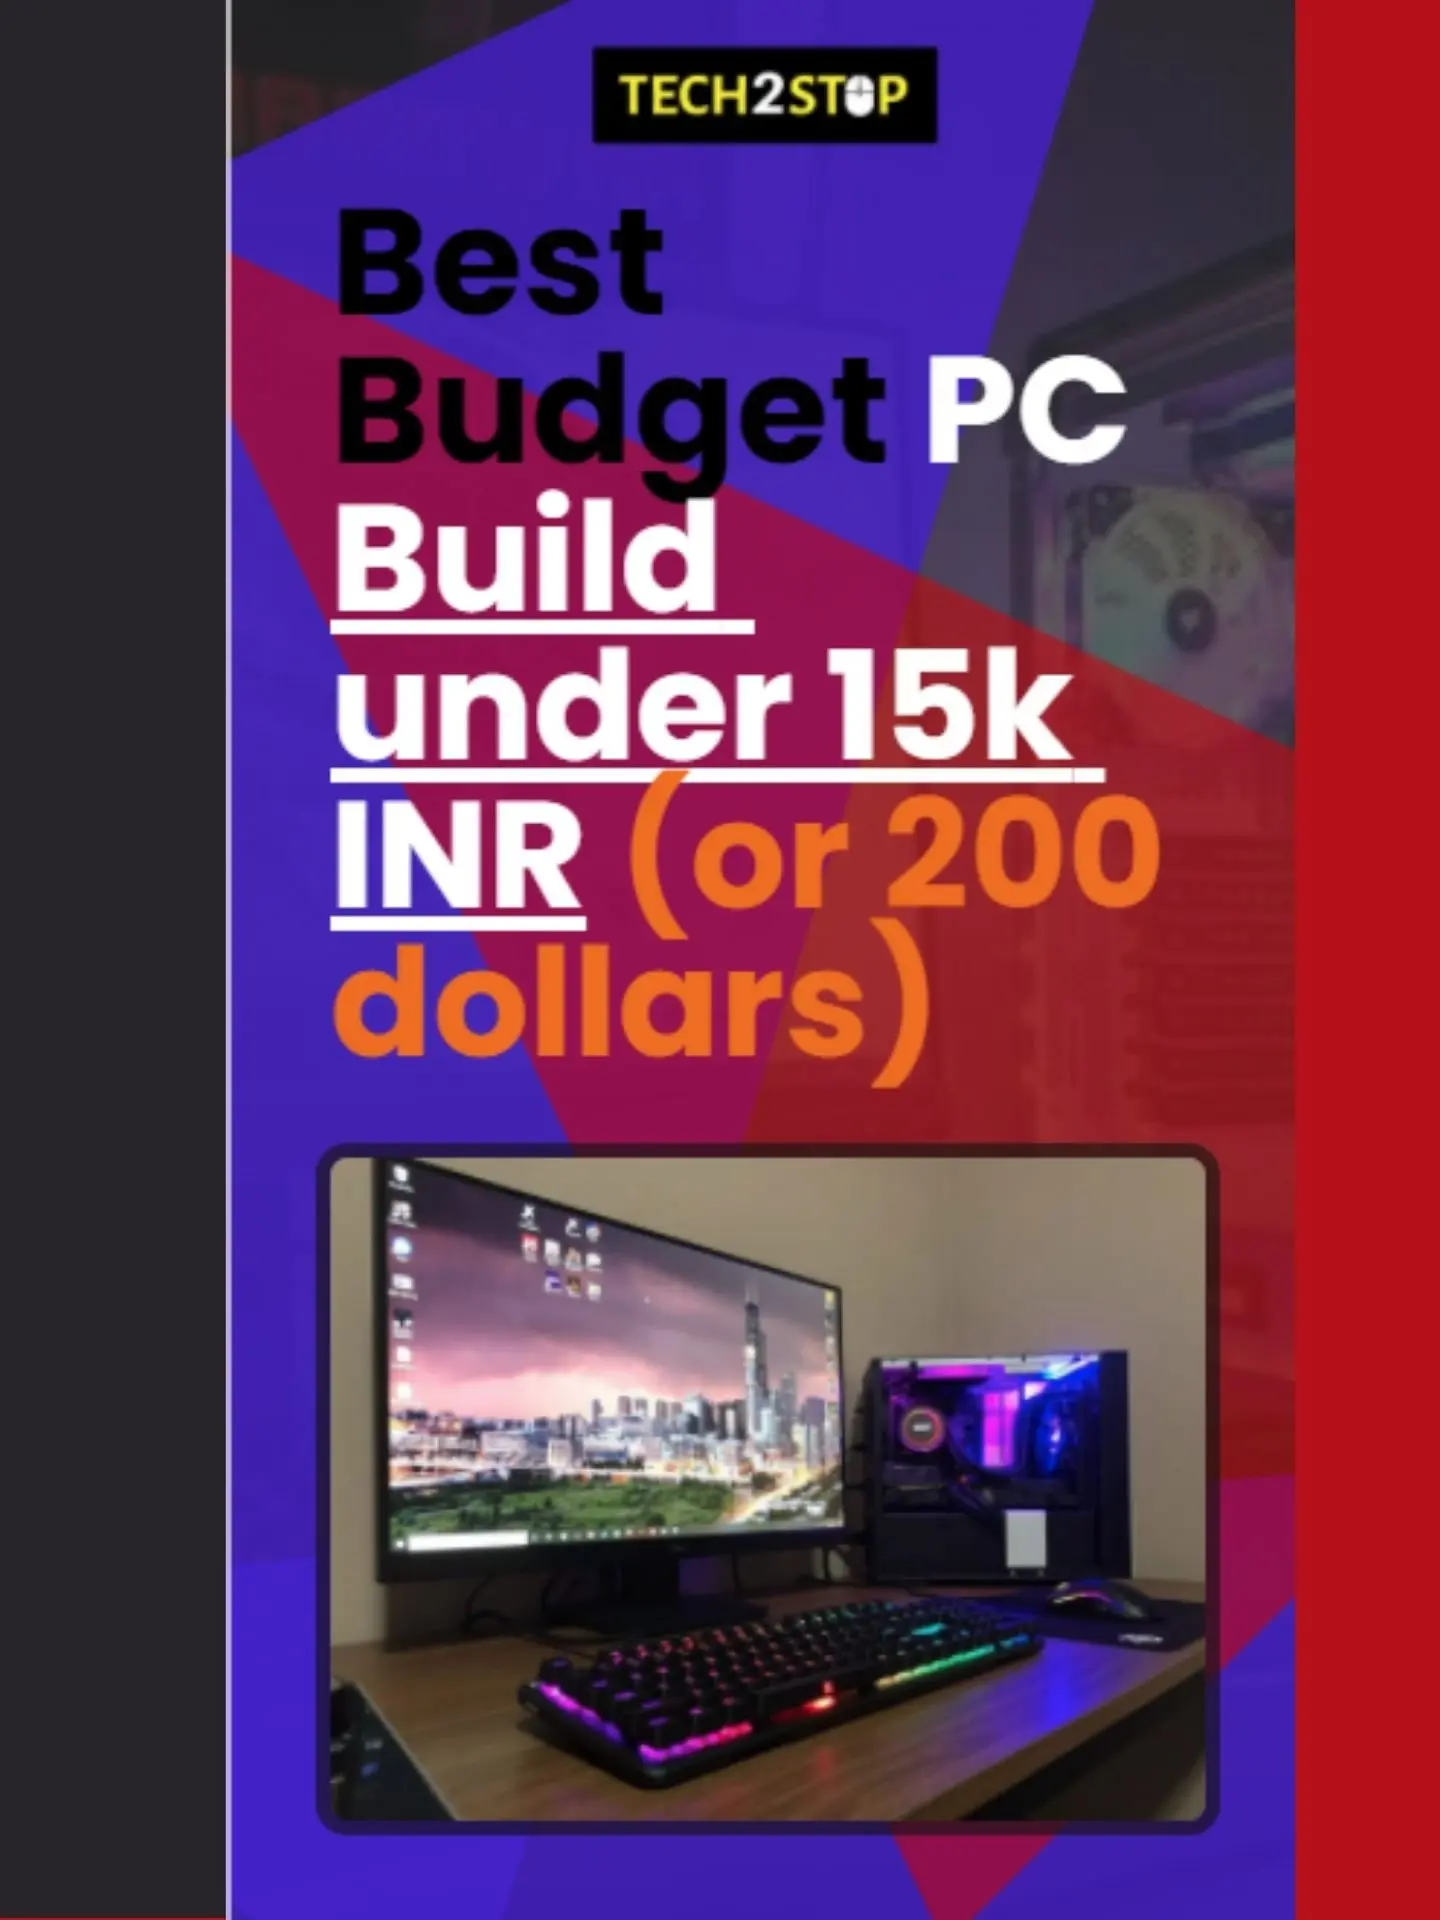 Best Budget Gaming Pc Under Inr Updated September 21 Tech2stop